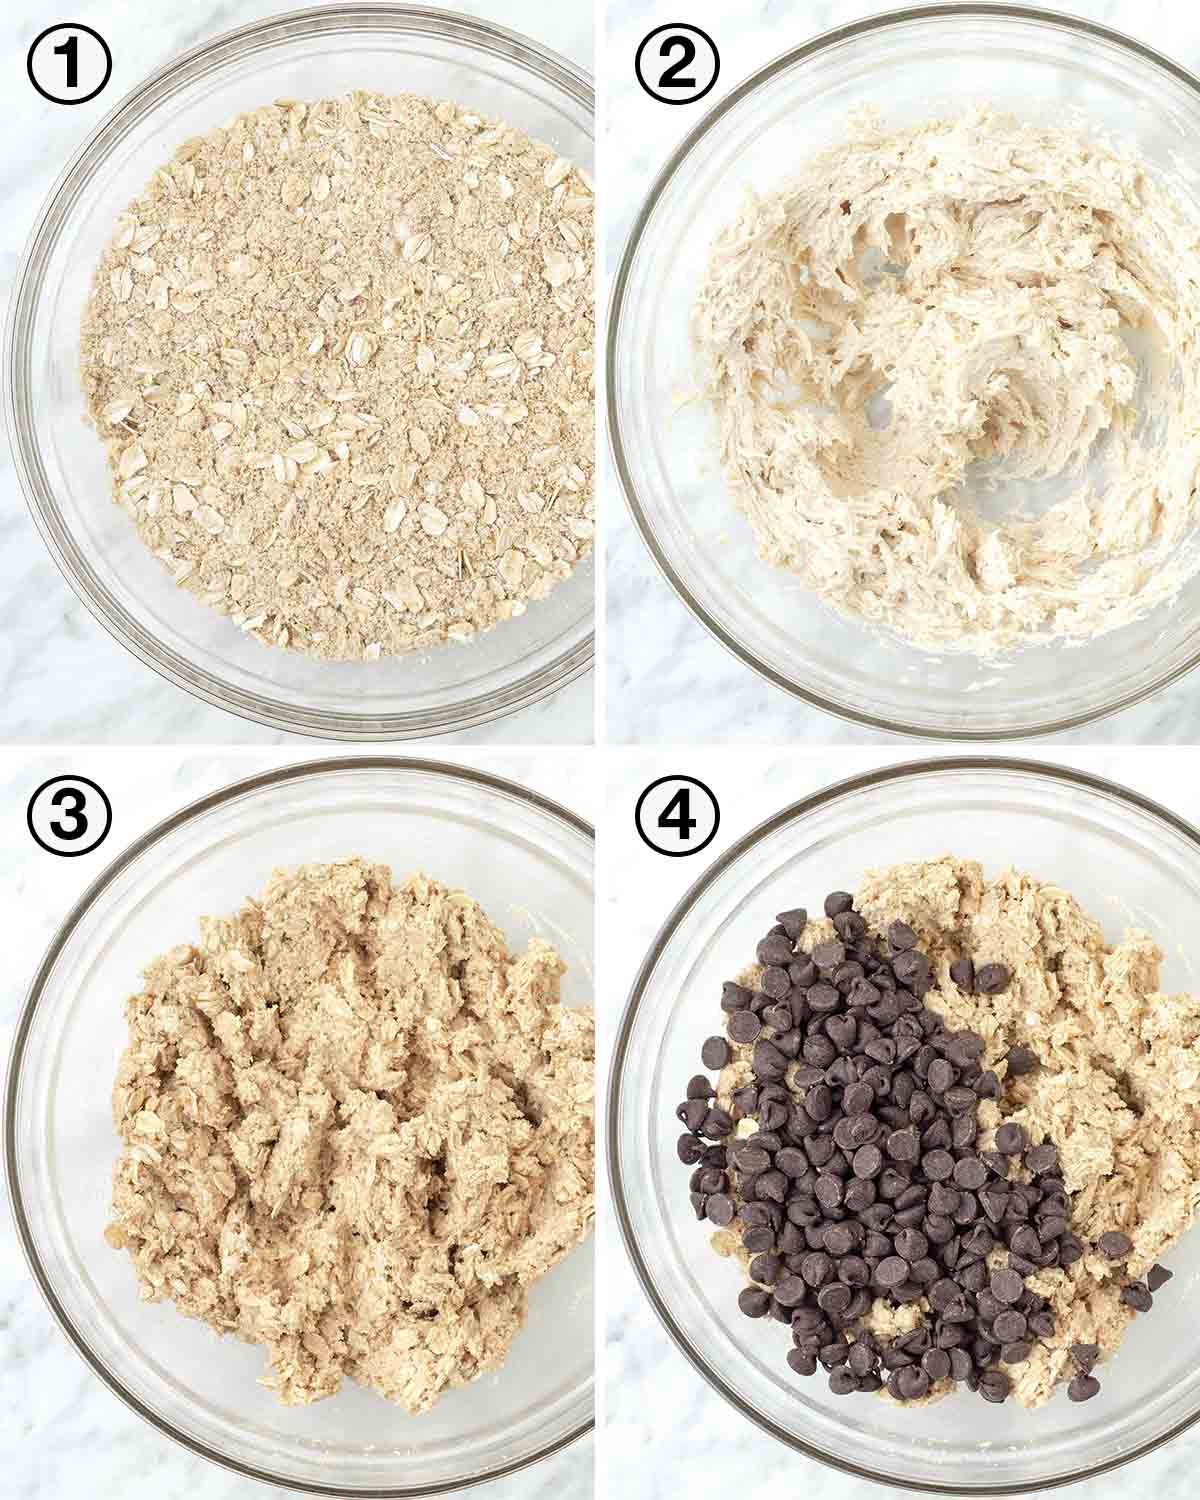 A collage of four images showing the first sequence of steps needed to make almond flour oatmeal cookies.